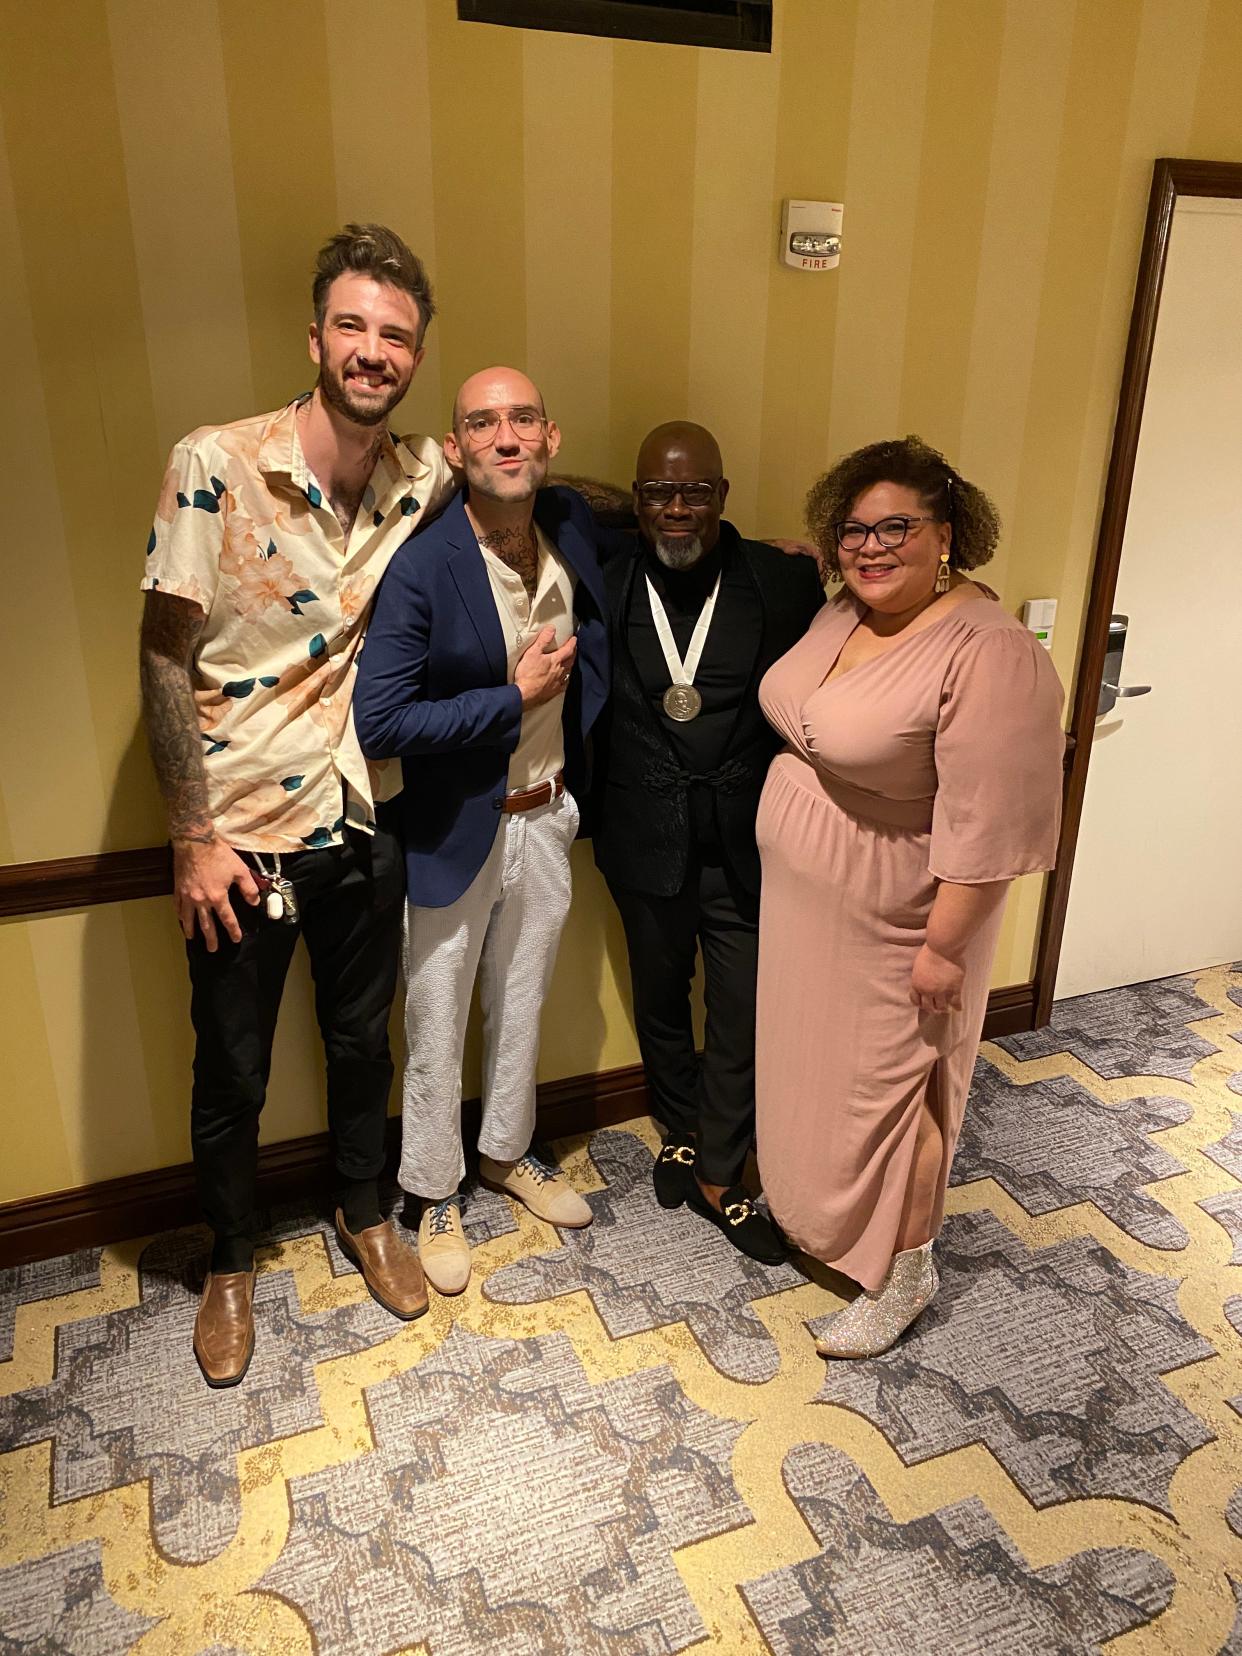 From left, chefs Caleb Stangroom, Zach Hutton, and Andrew Black, pose for a photo with The Oklahoman food and dining reporter, JaNae Williams, at Andrew Black's James Beard Award celebration in Oklahoma City. Hutton and Stangroom will collaborate on a pop-up Jan. 31.